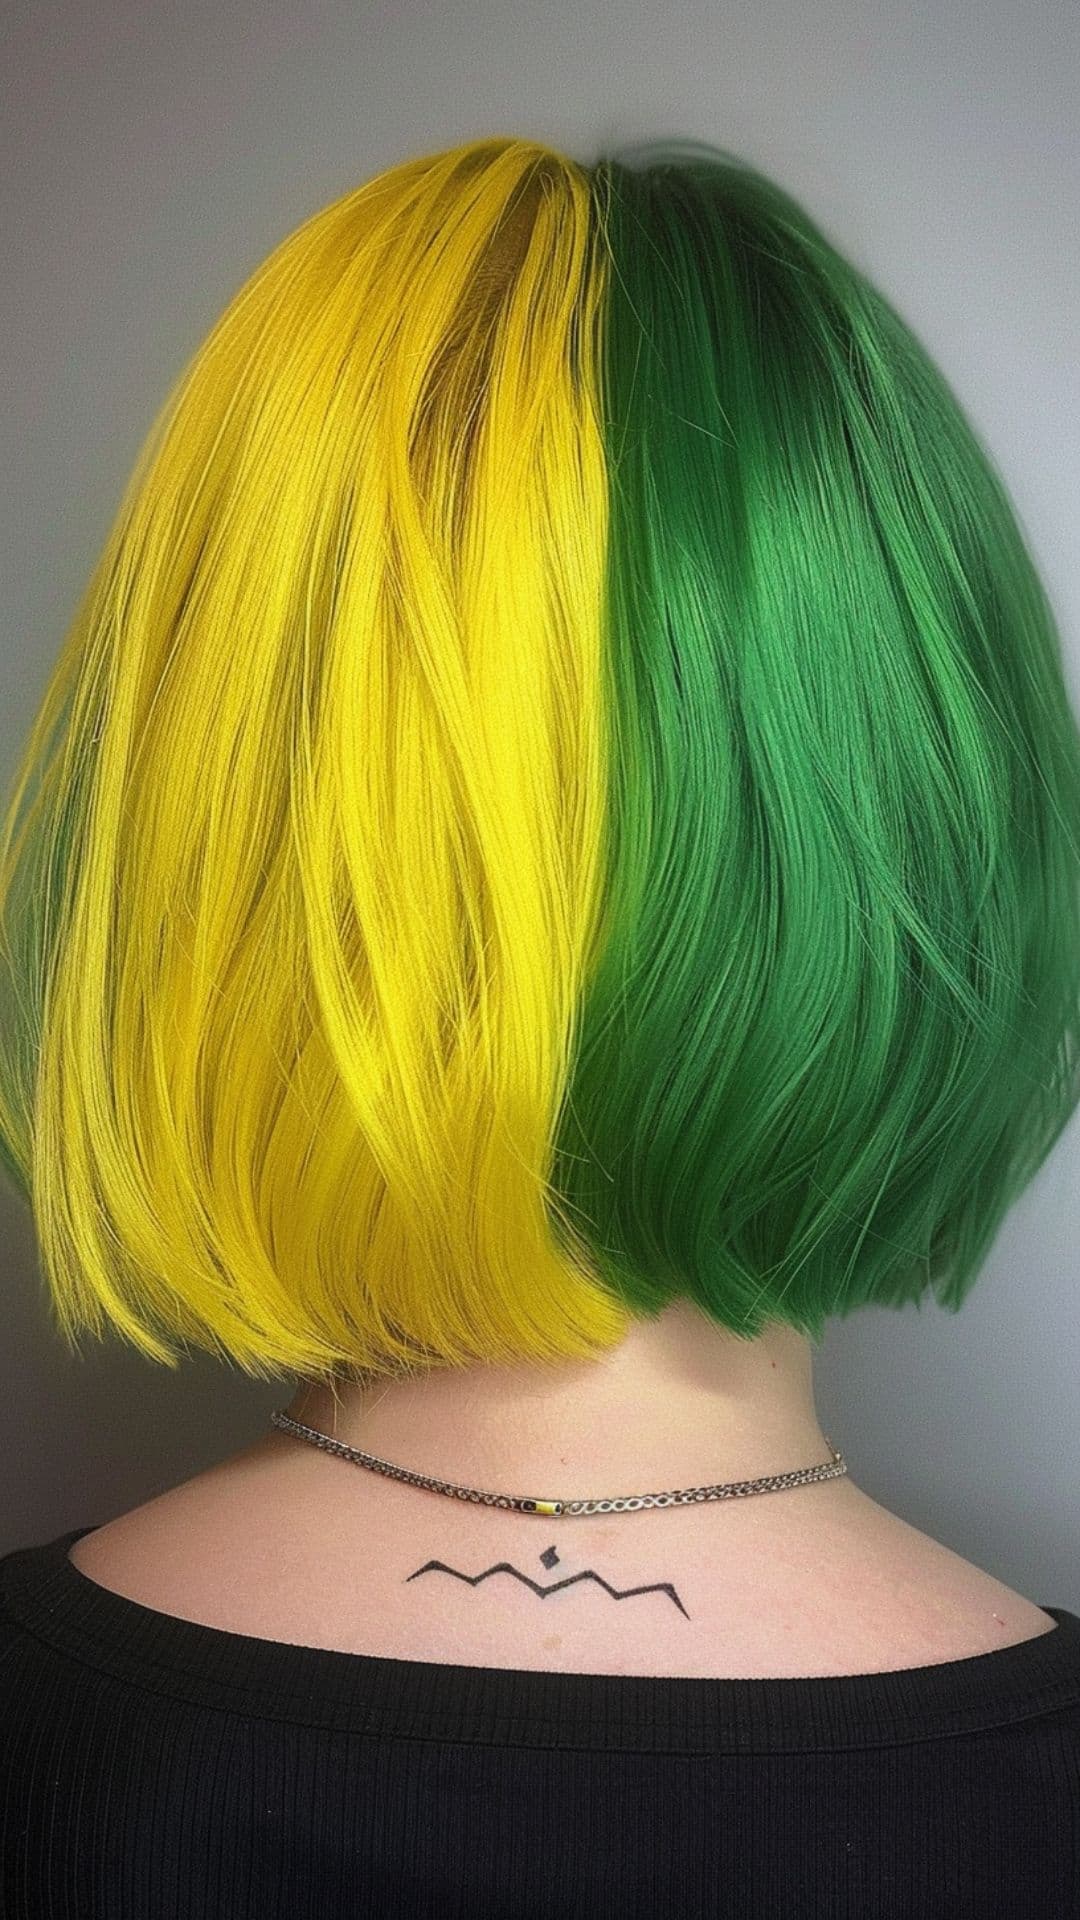 A woman modelling a green and yellow hair.